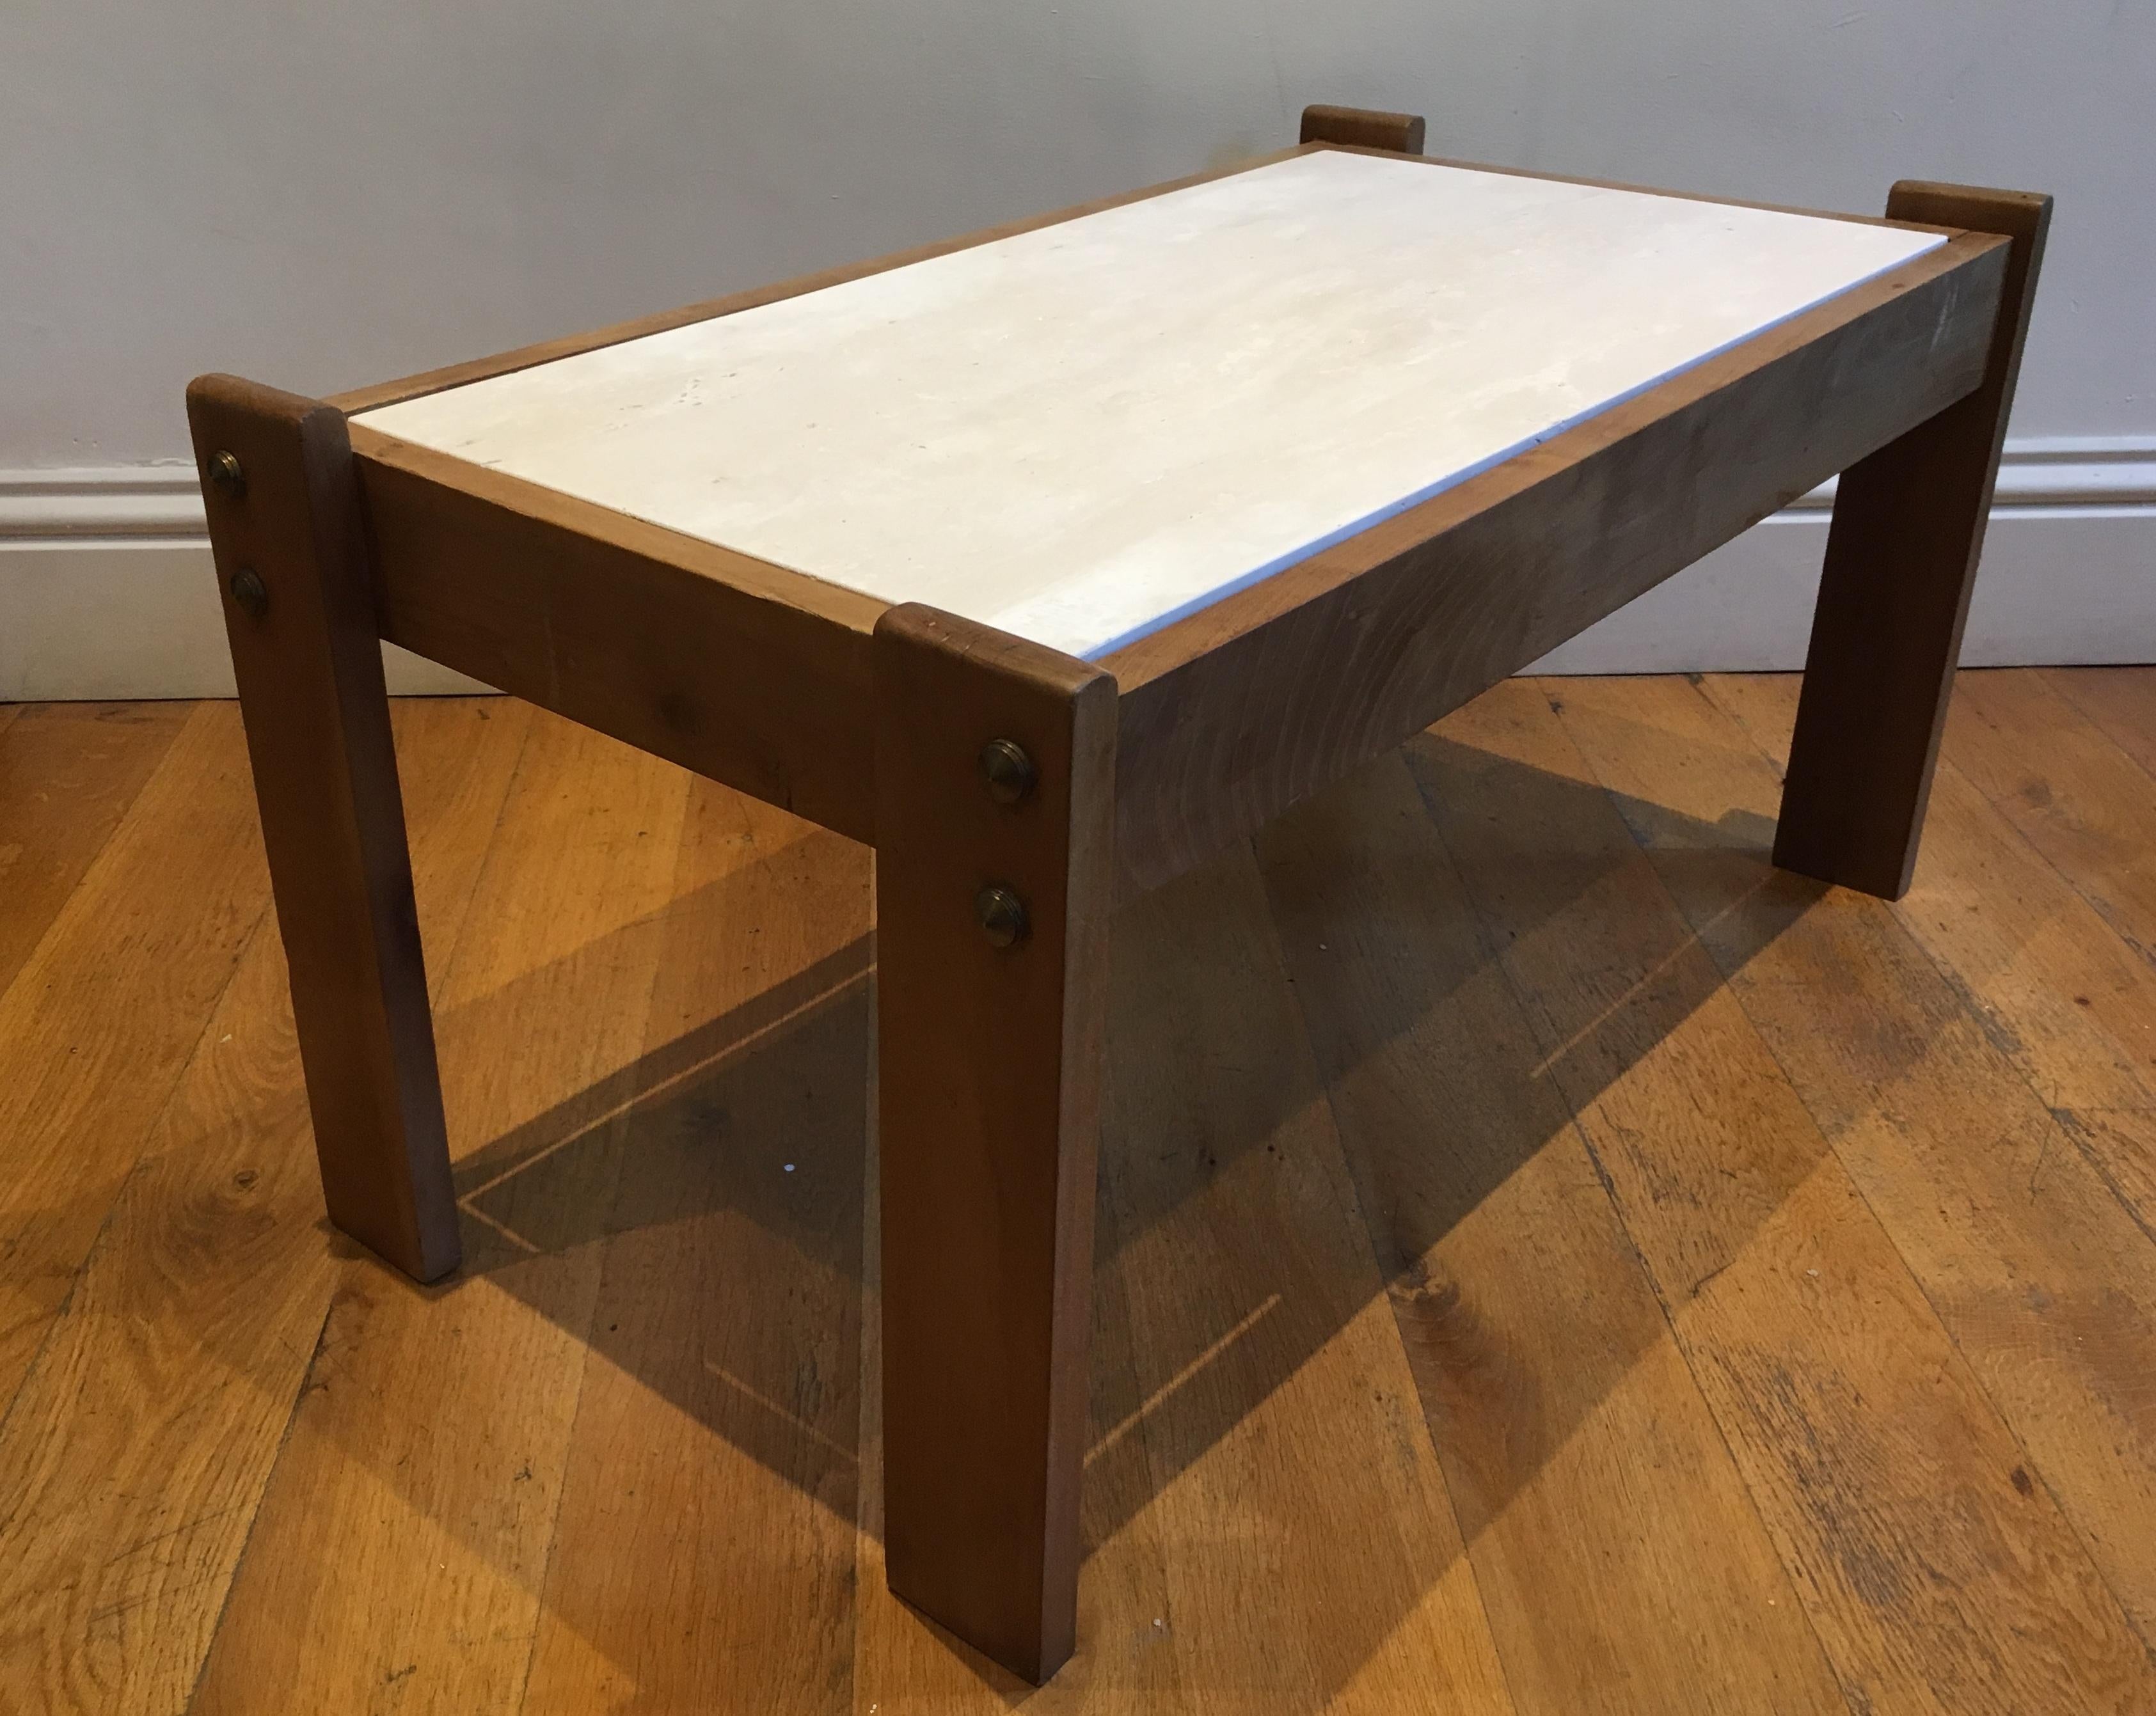 An elegant cherrywood and unfilled travertine top (replaced) coffee/centre table with bronze details. An unrestrained design, in the manner of Jacques Adnet.